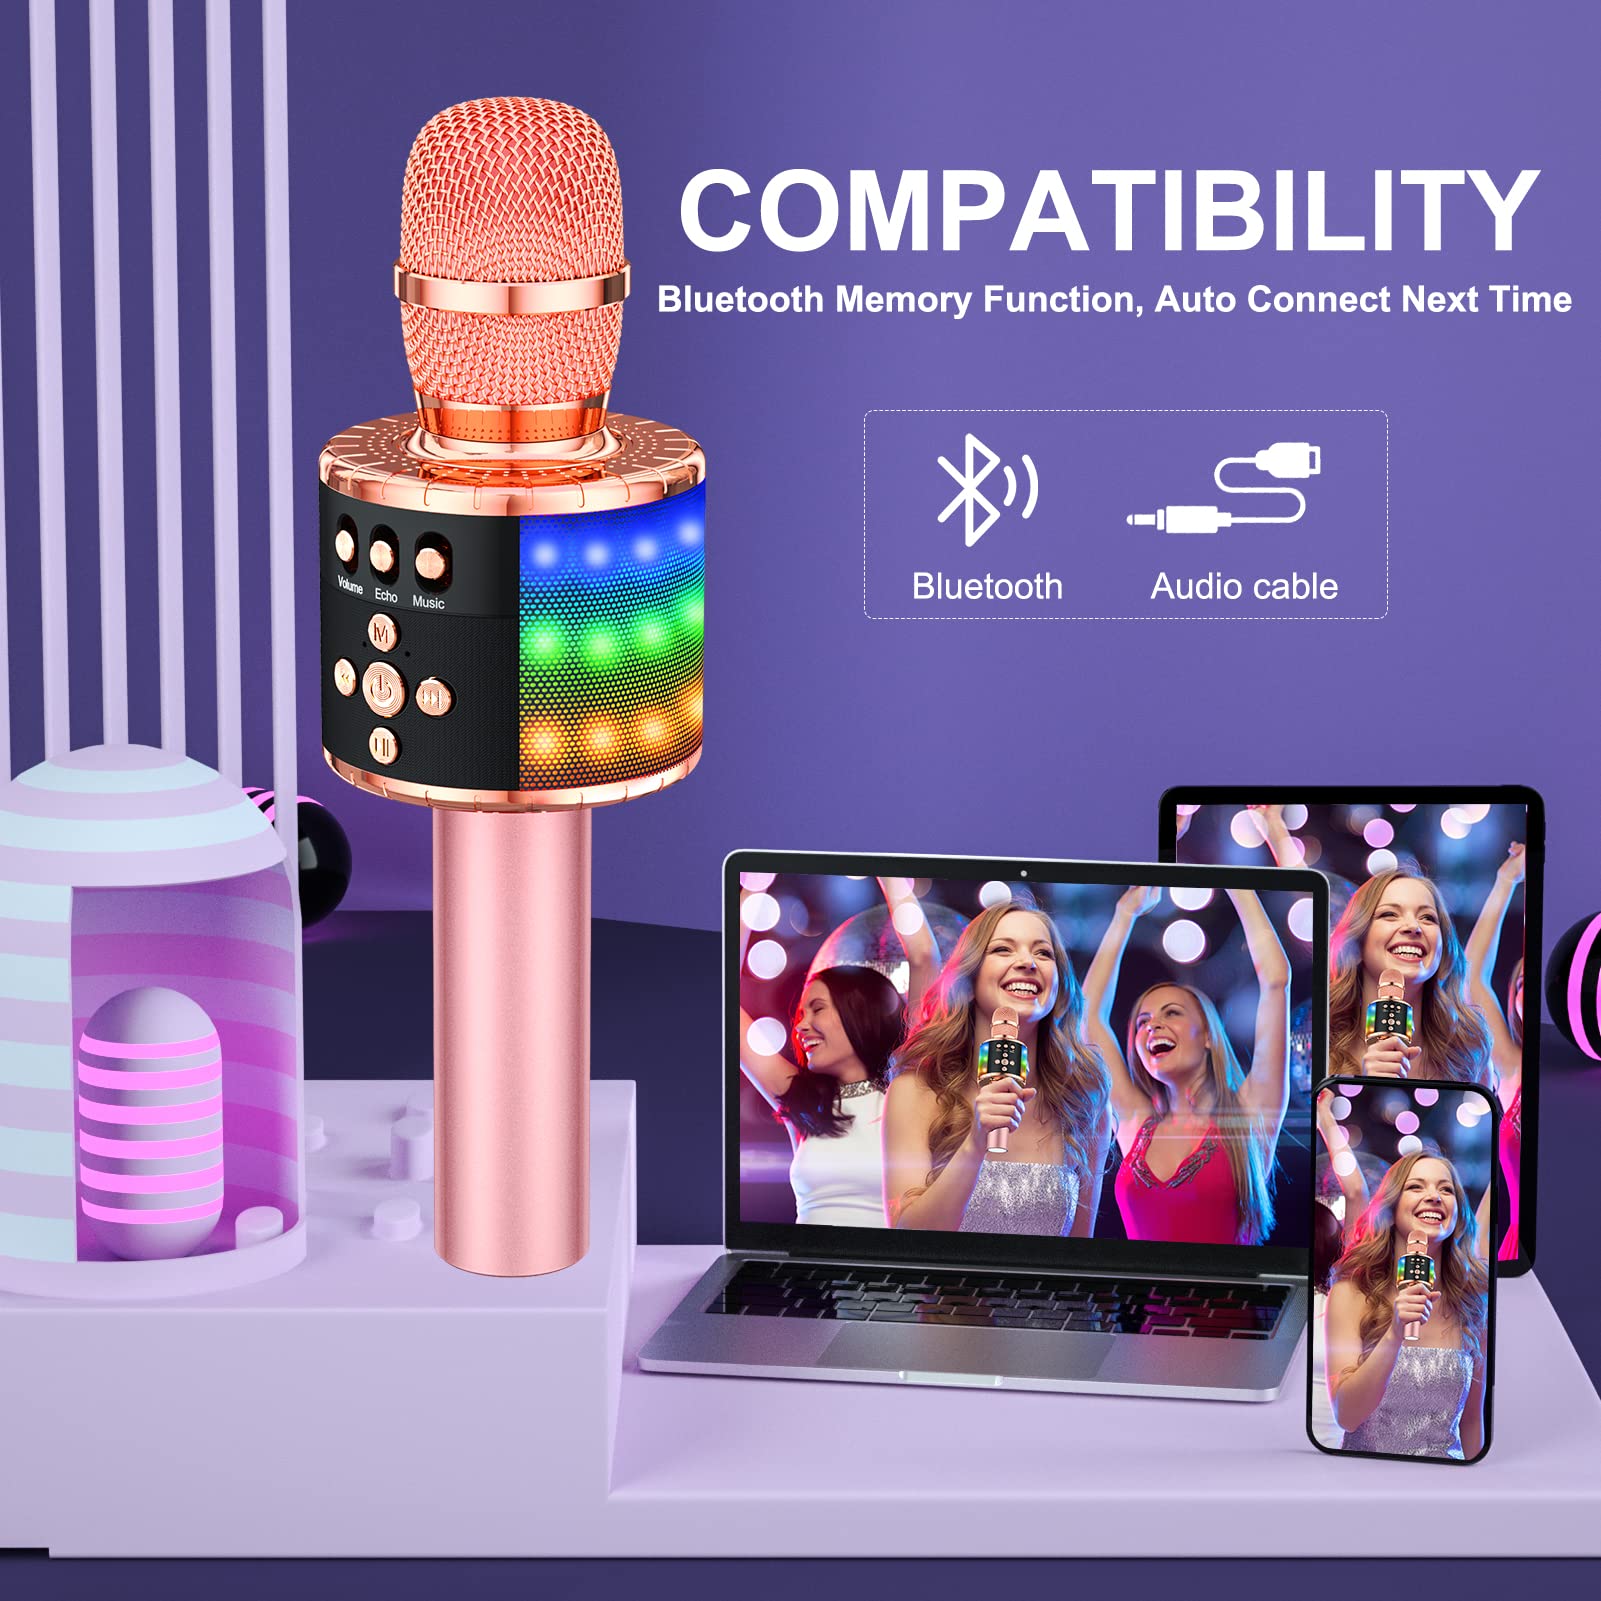 BONAOK Wireless Bluetooth Karaoke Microphone with Controllable LED Lights, 4-in-1 Portable Handheld Mic Speaker for All Smartphones, Birthday for Kids Adults All Age Q78(Rose Gold)